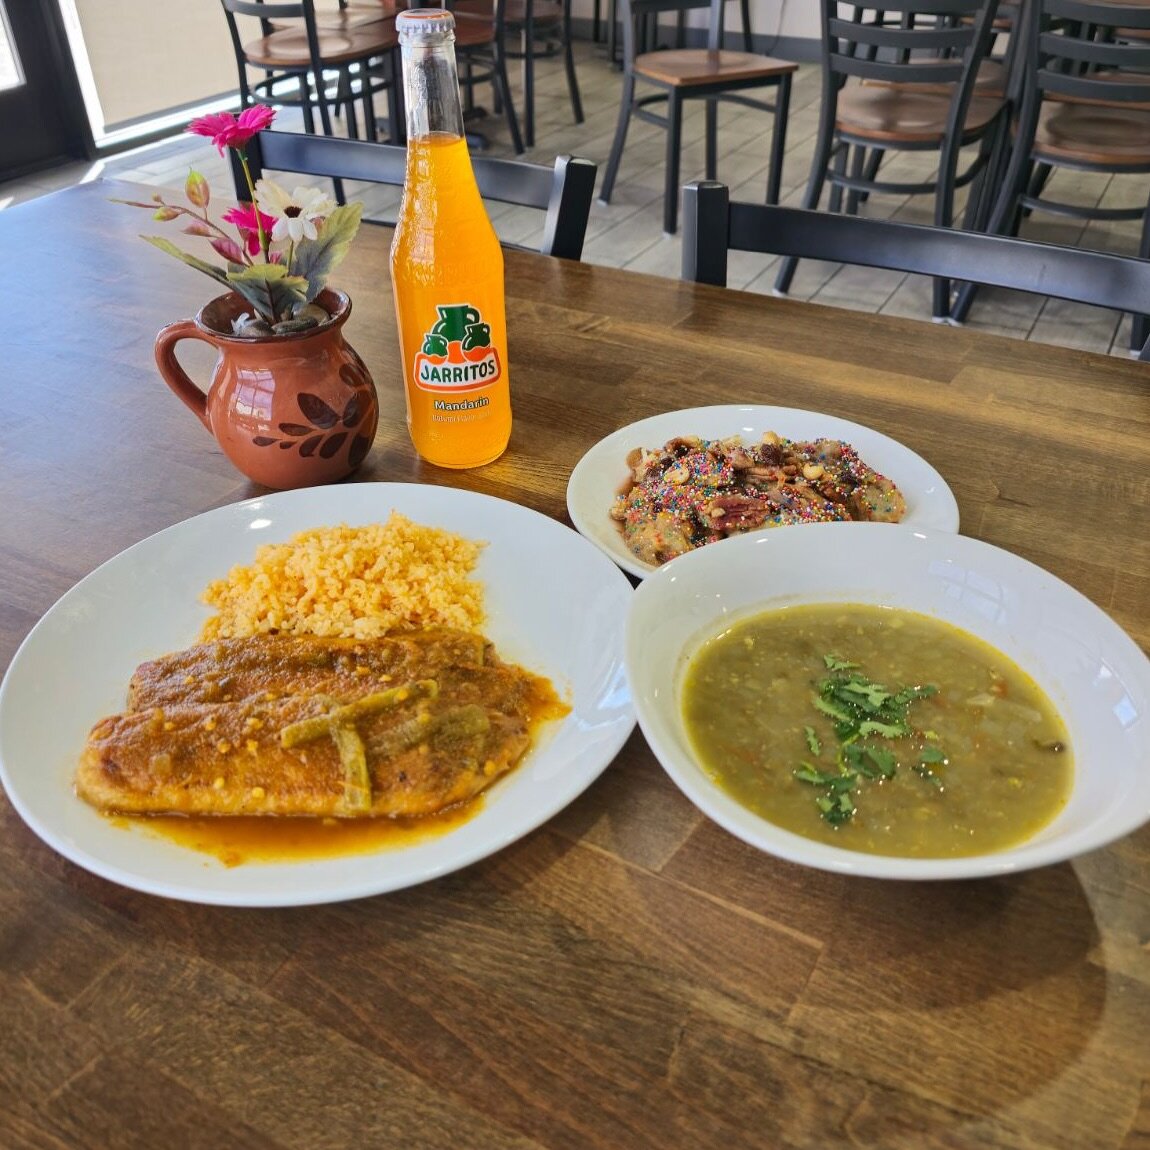 Keep the Lenten season going strong with our delicious Lent specials at Los Abuelos! 

Enjoy flavorful Mexican dishes that are perfect for your Lenten observance. 

Featuring our Chile Relleno Plate, lentels and capirotada! 

#LentSpecials #MexicanCu